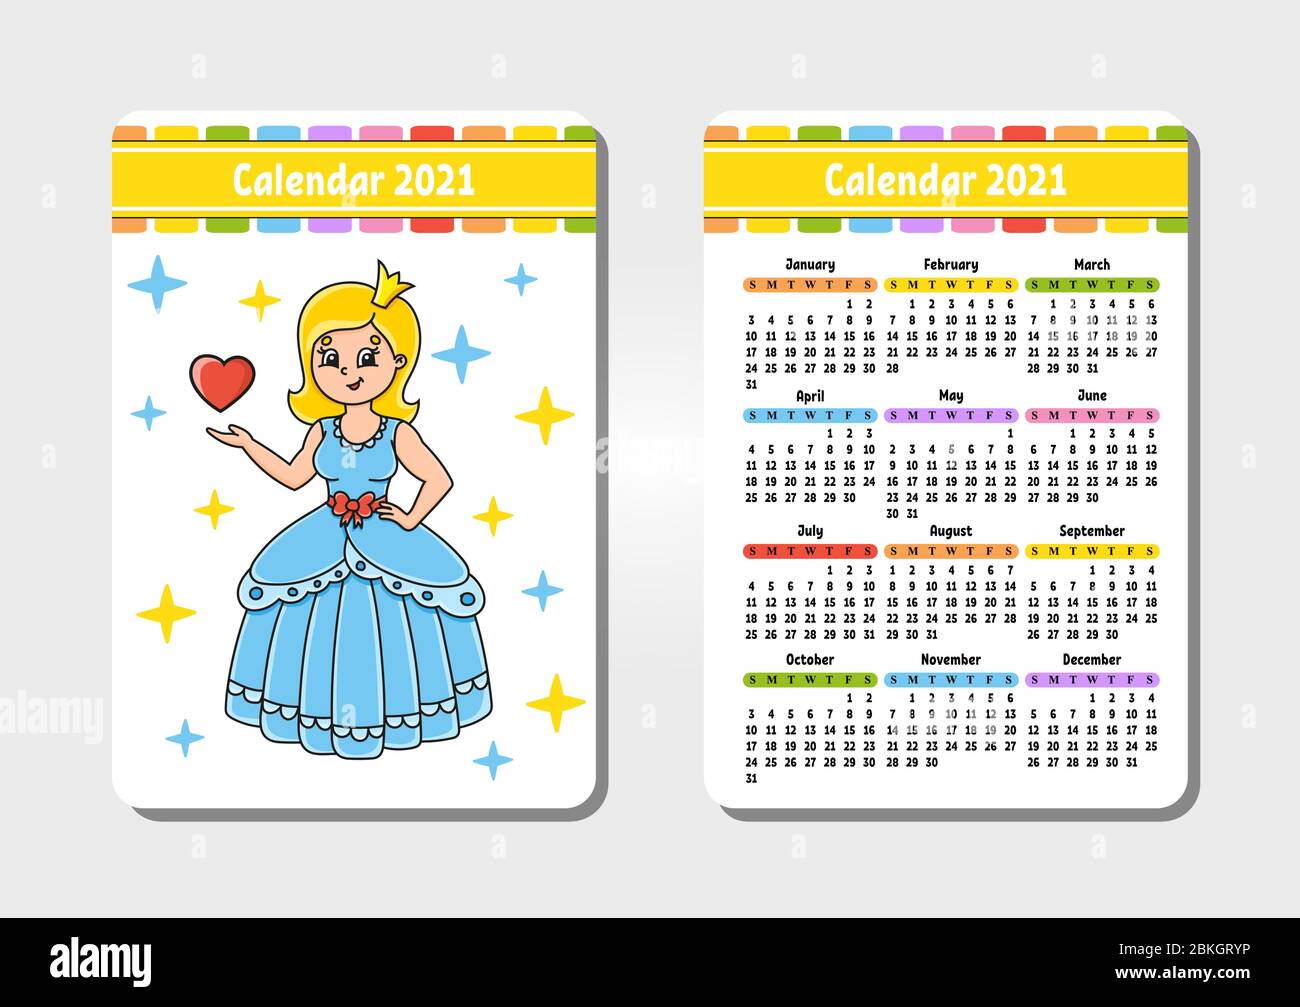 Calendar for 2021 with a cute character. Sweet princess. Pocket size. Fun and bright design. Color isolated vector illustration. Cartoon style. Stock Vector